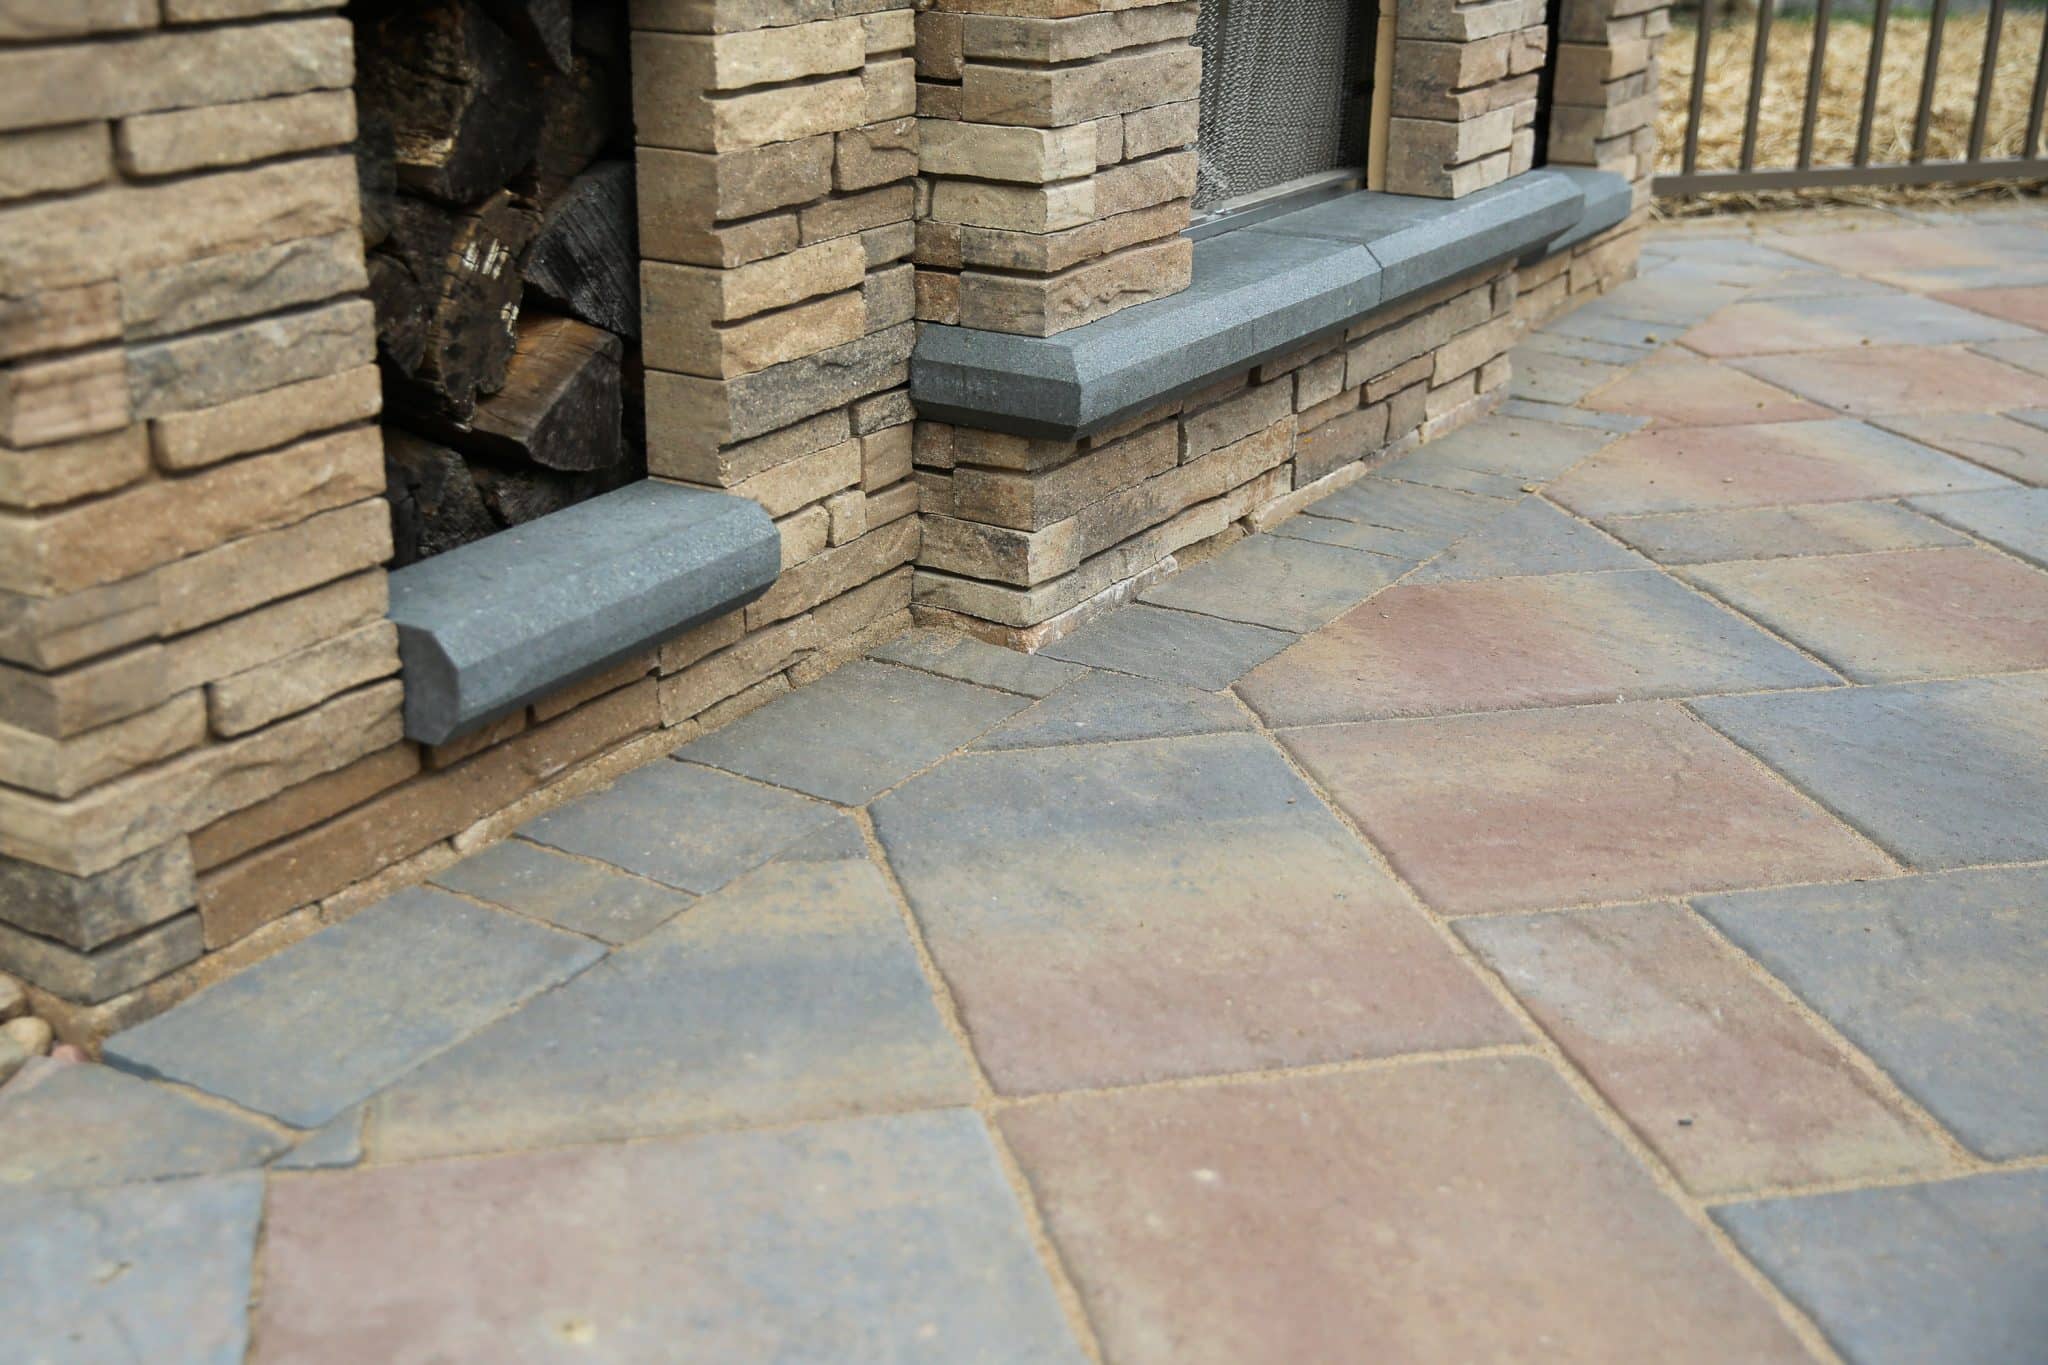 A detail showing the Belgard precast concrete paver patio with a contrasting border cut to fit around the base of a precast concrete fireplace.